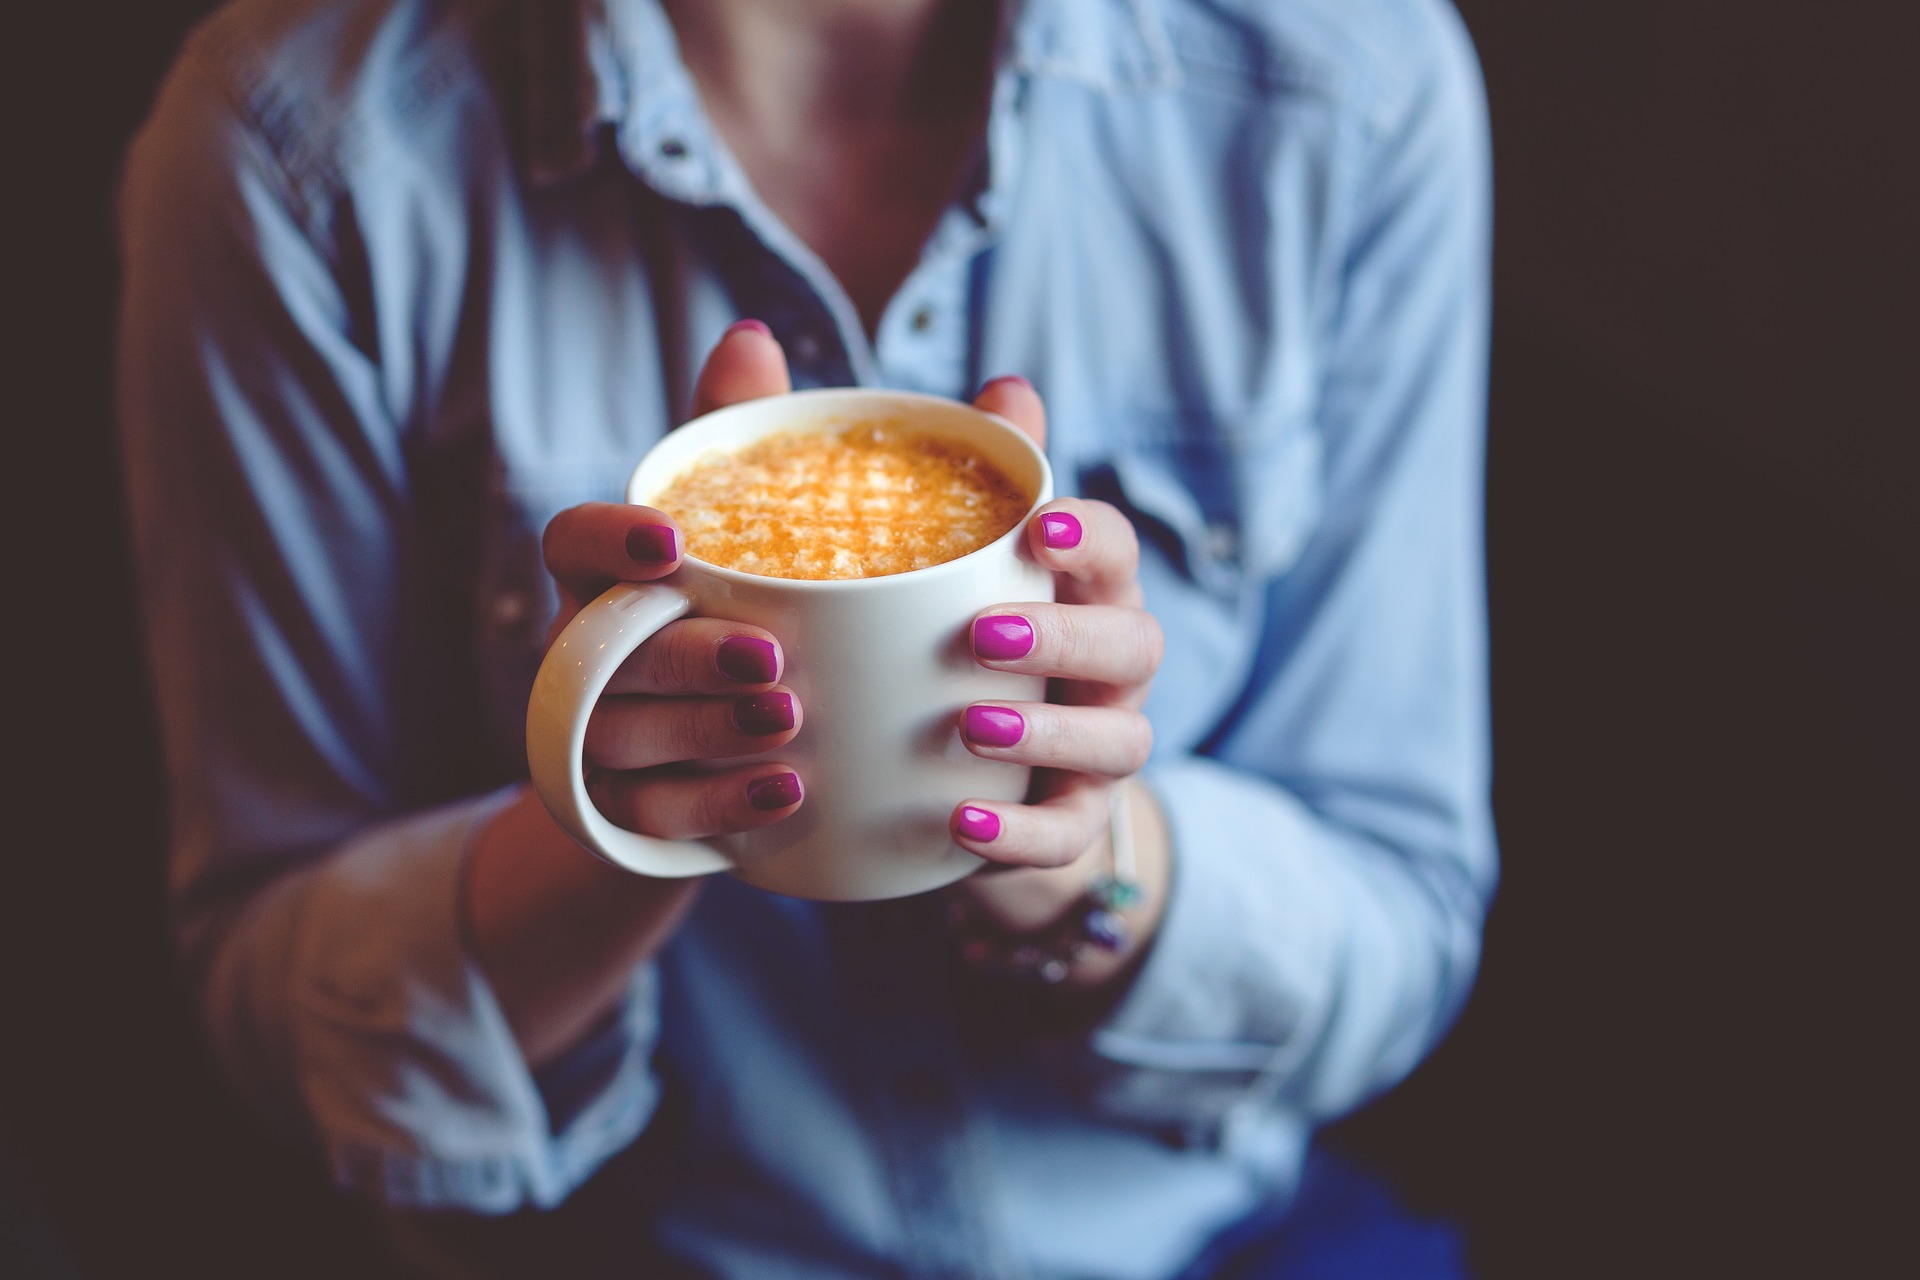 The best time to drink coffee according to science